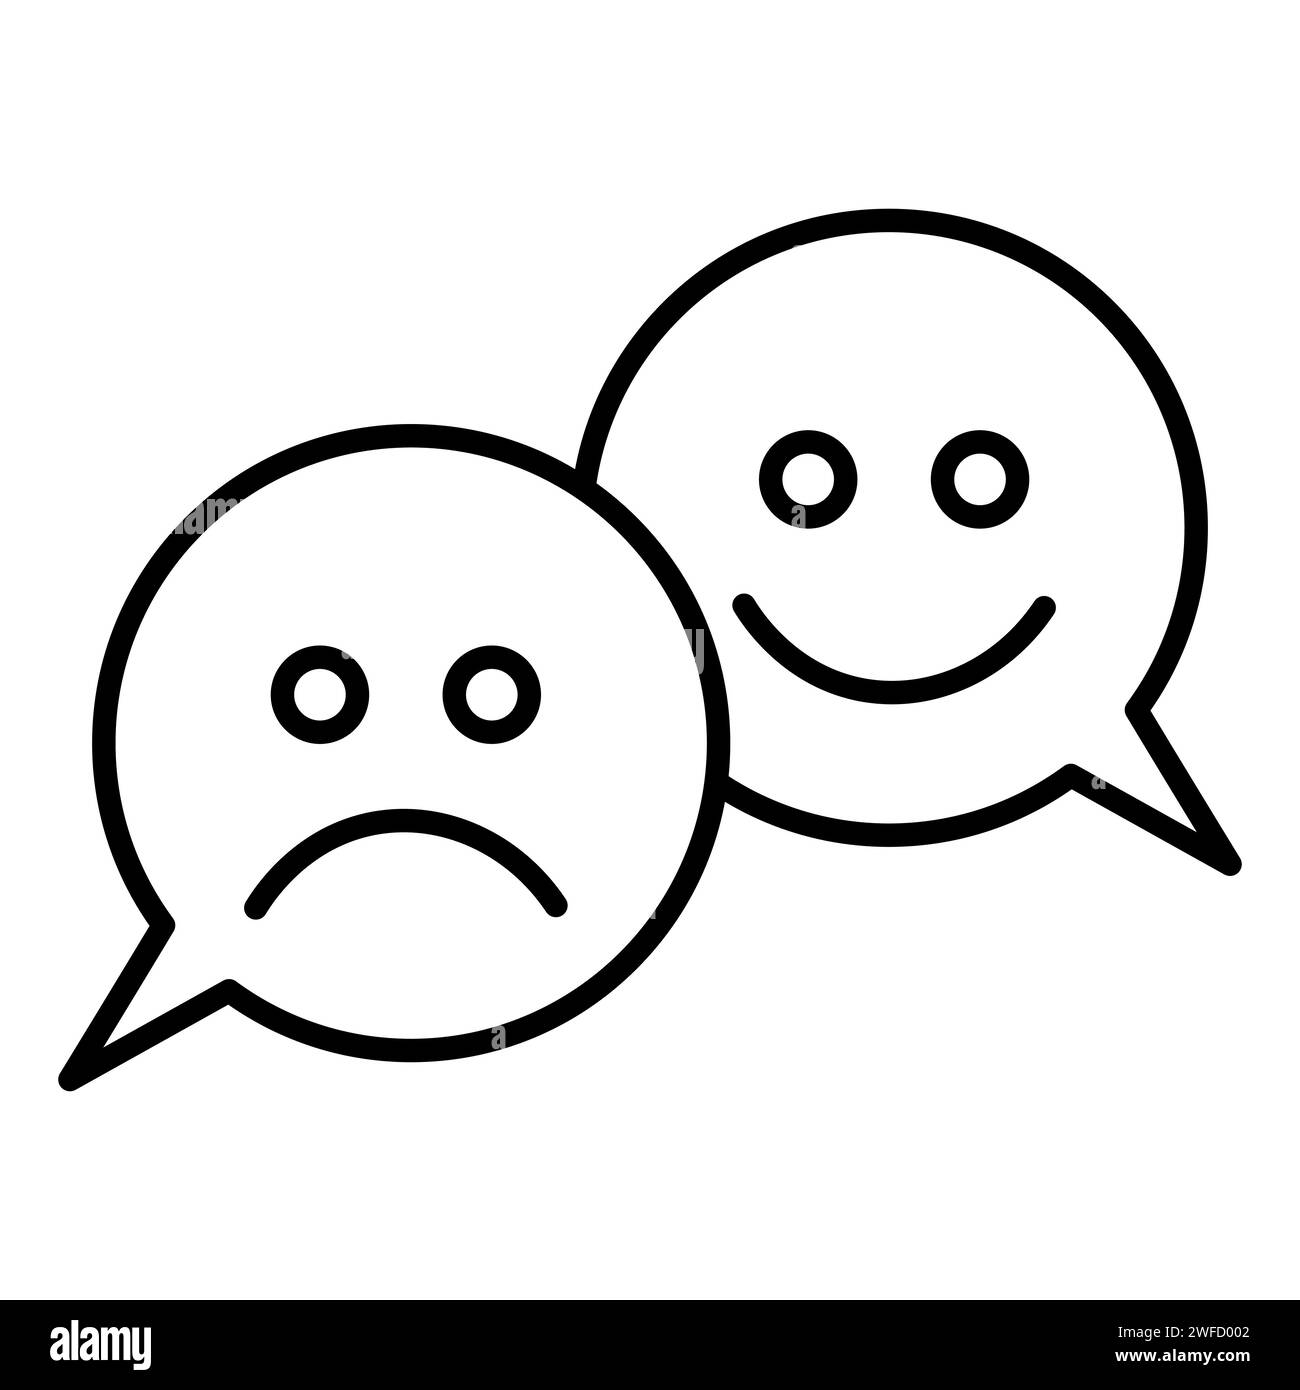 chat icon with emoticon. Facial expression. chat bubble. Sad face. Vector illustration. stock image. EPS 10. Stock Vector